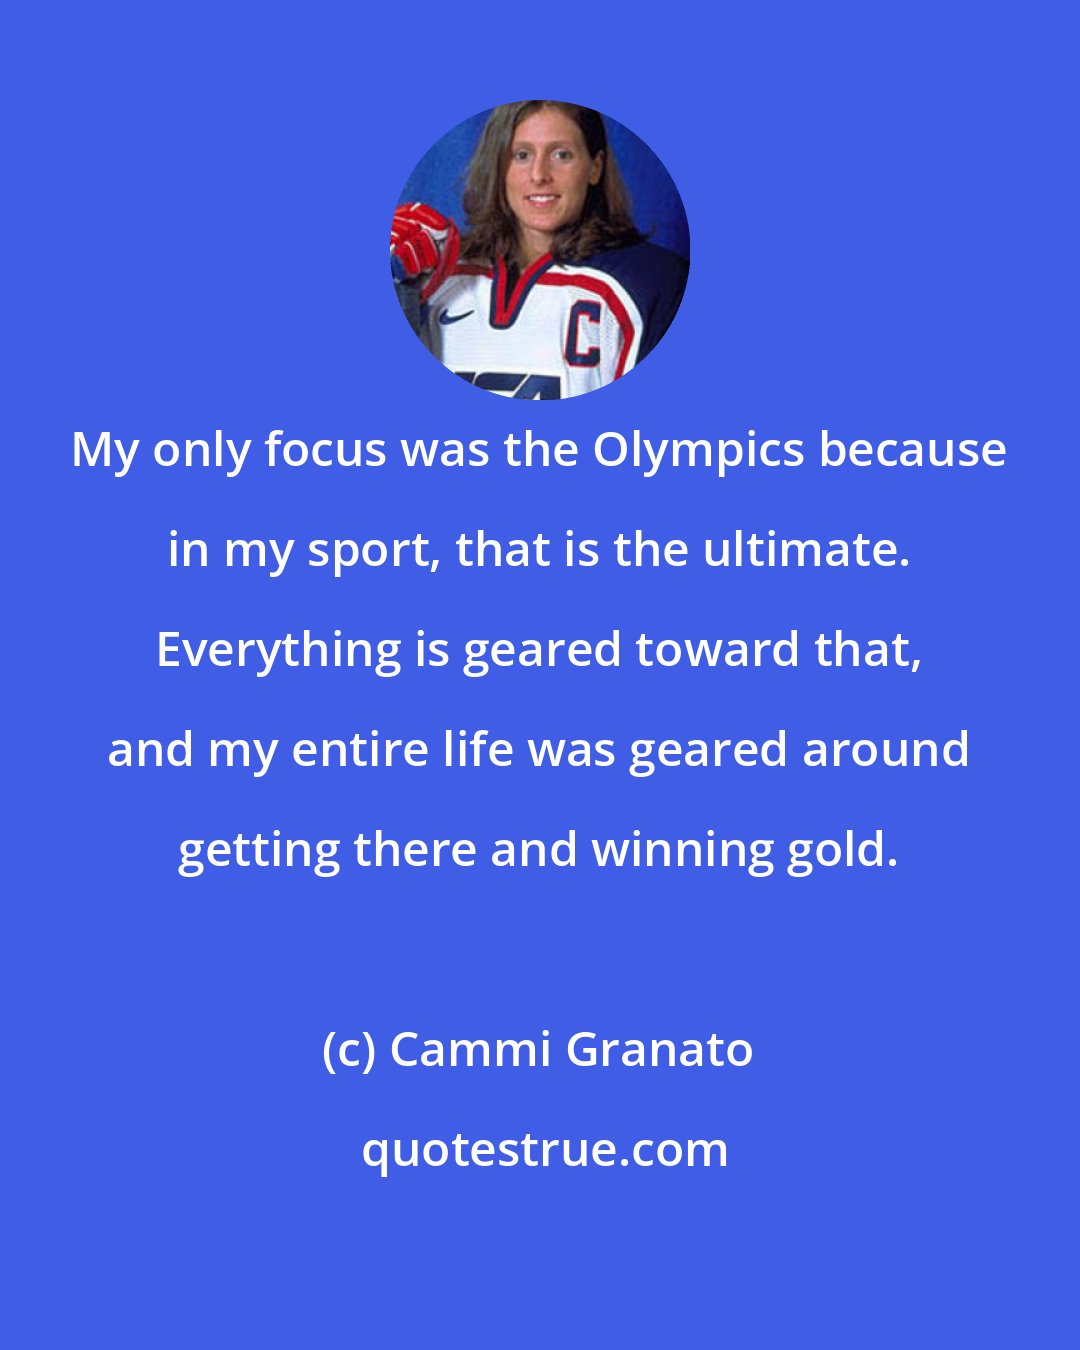 Cammi Granato: My only focus was the Olympics because in my sport, that is the ultimate. Everything is geared toward that, and my entire life was geared around getting there and winning gold.